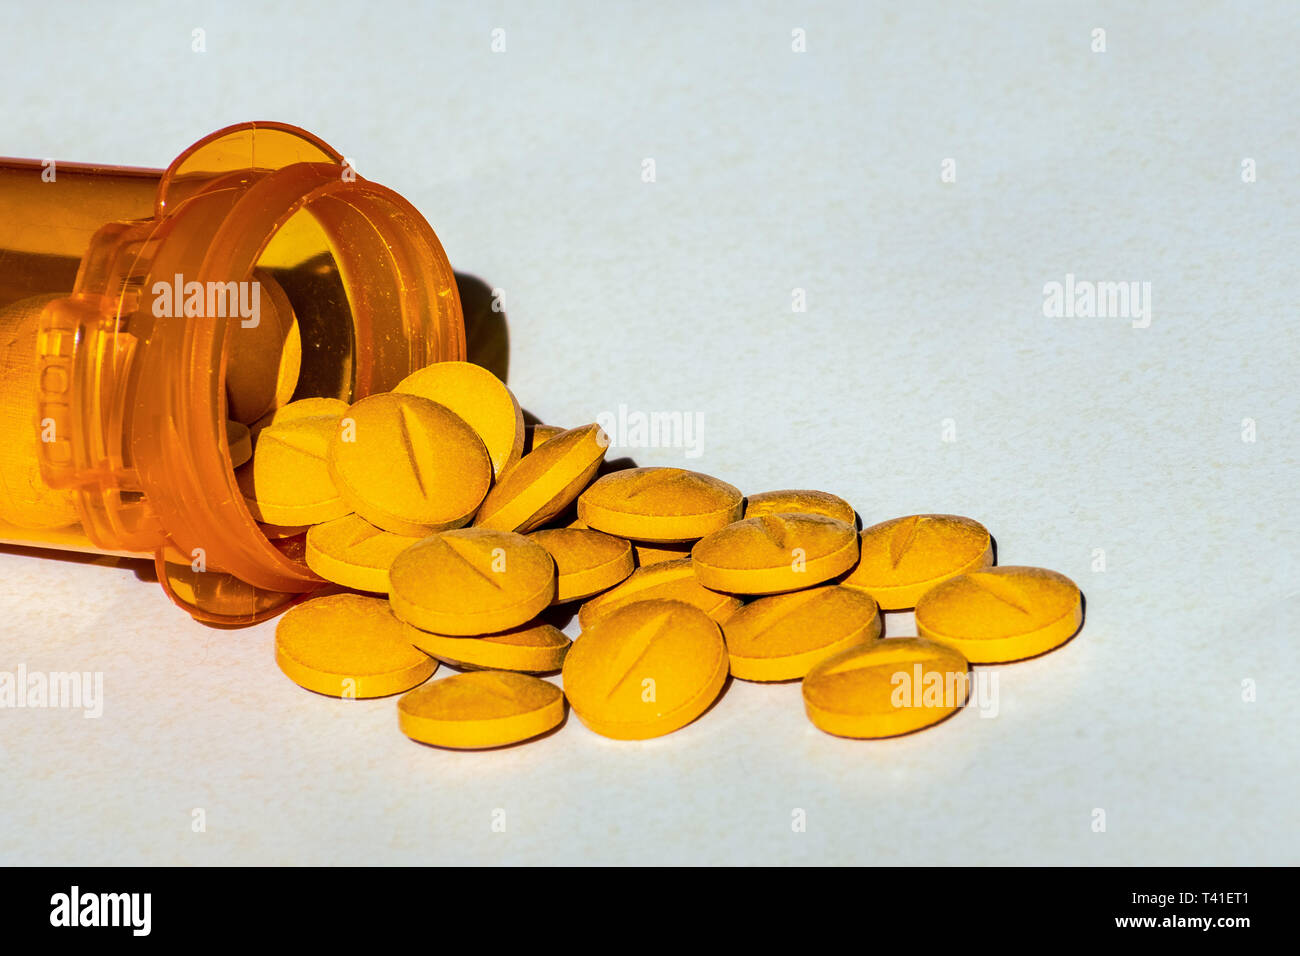 Yellow prescription pills spilled onto a table. Concept of opioid addiction and healthcare industry Stock Photo